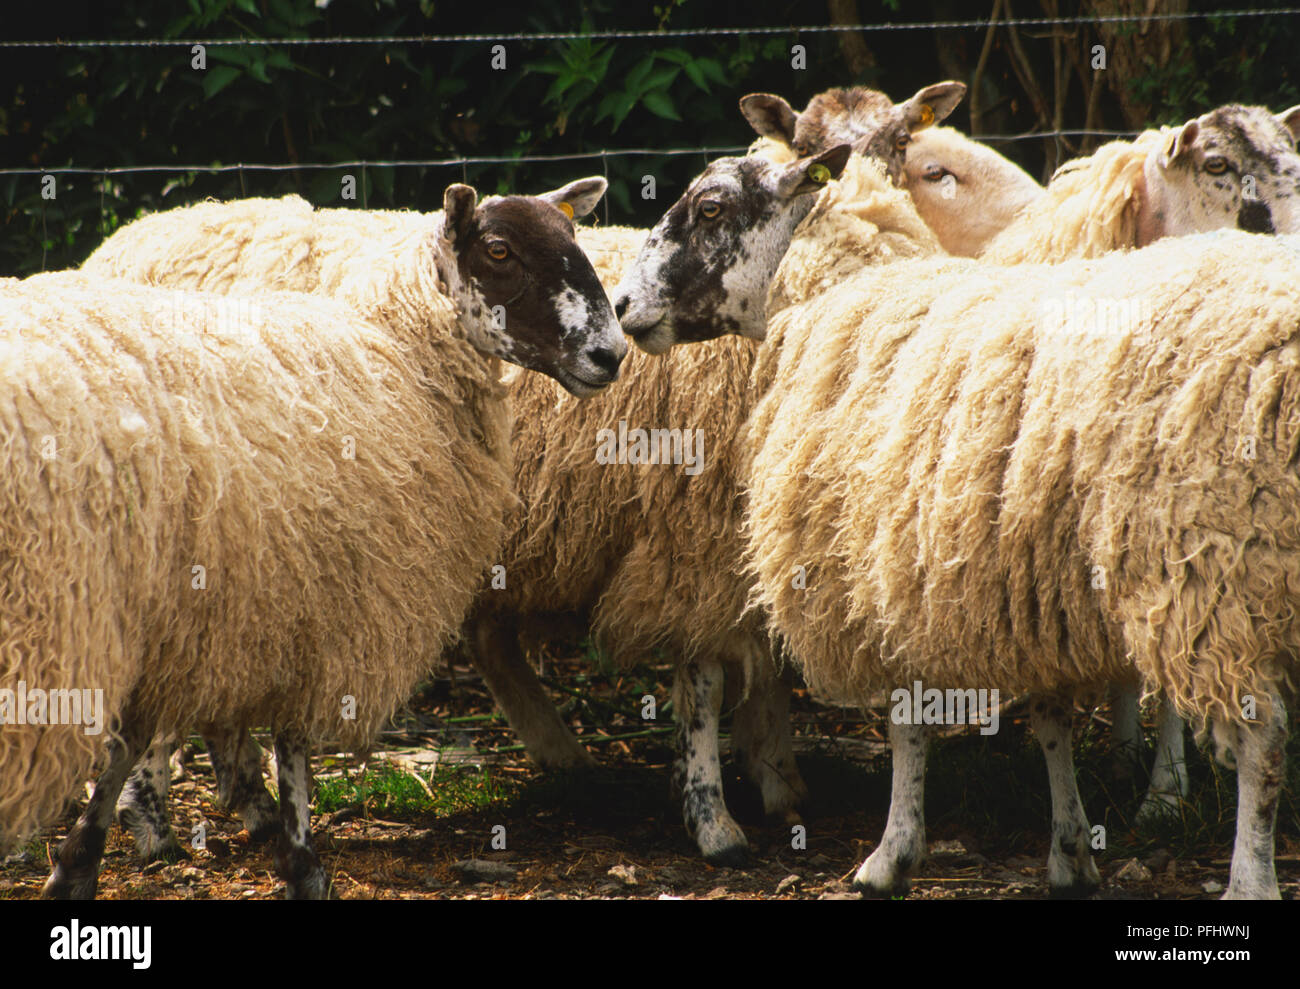 Herd of sheep with black and white heads, front view Stock Photo